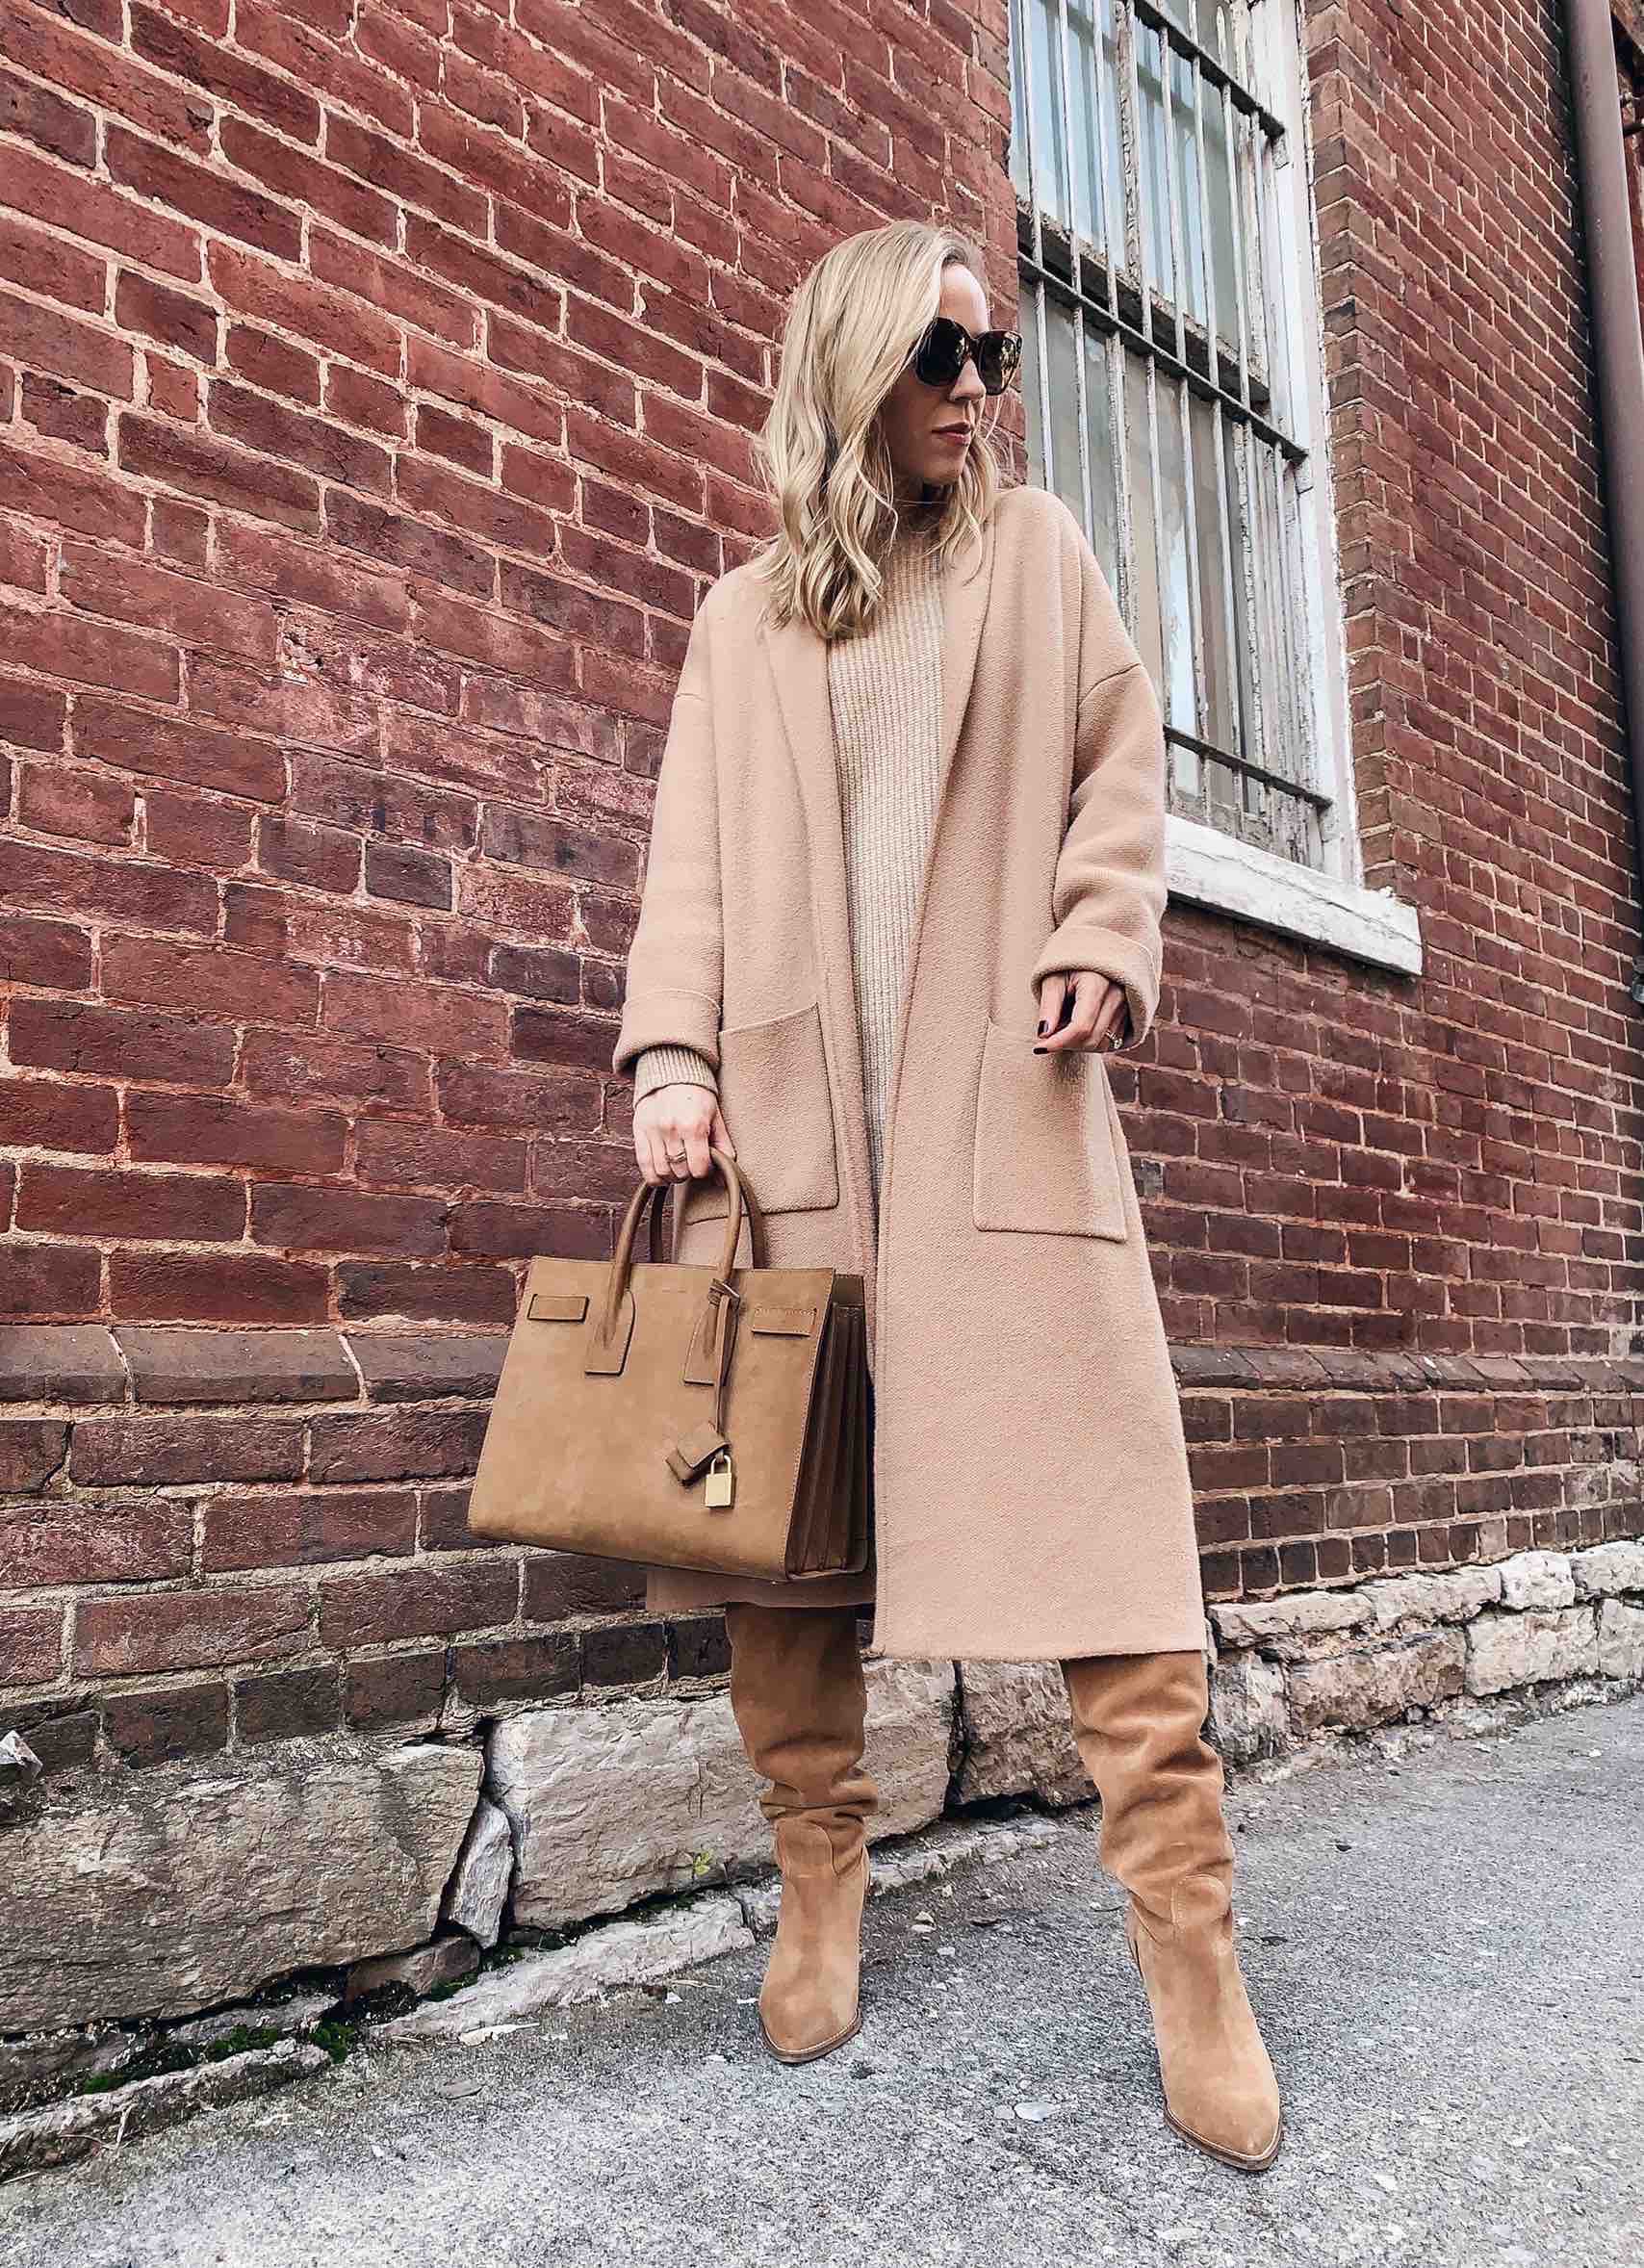 Trending for Fall 2020: Slouchy Boots & How to Wear Them - Meagan's Moda